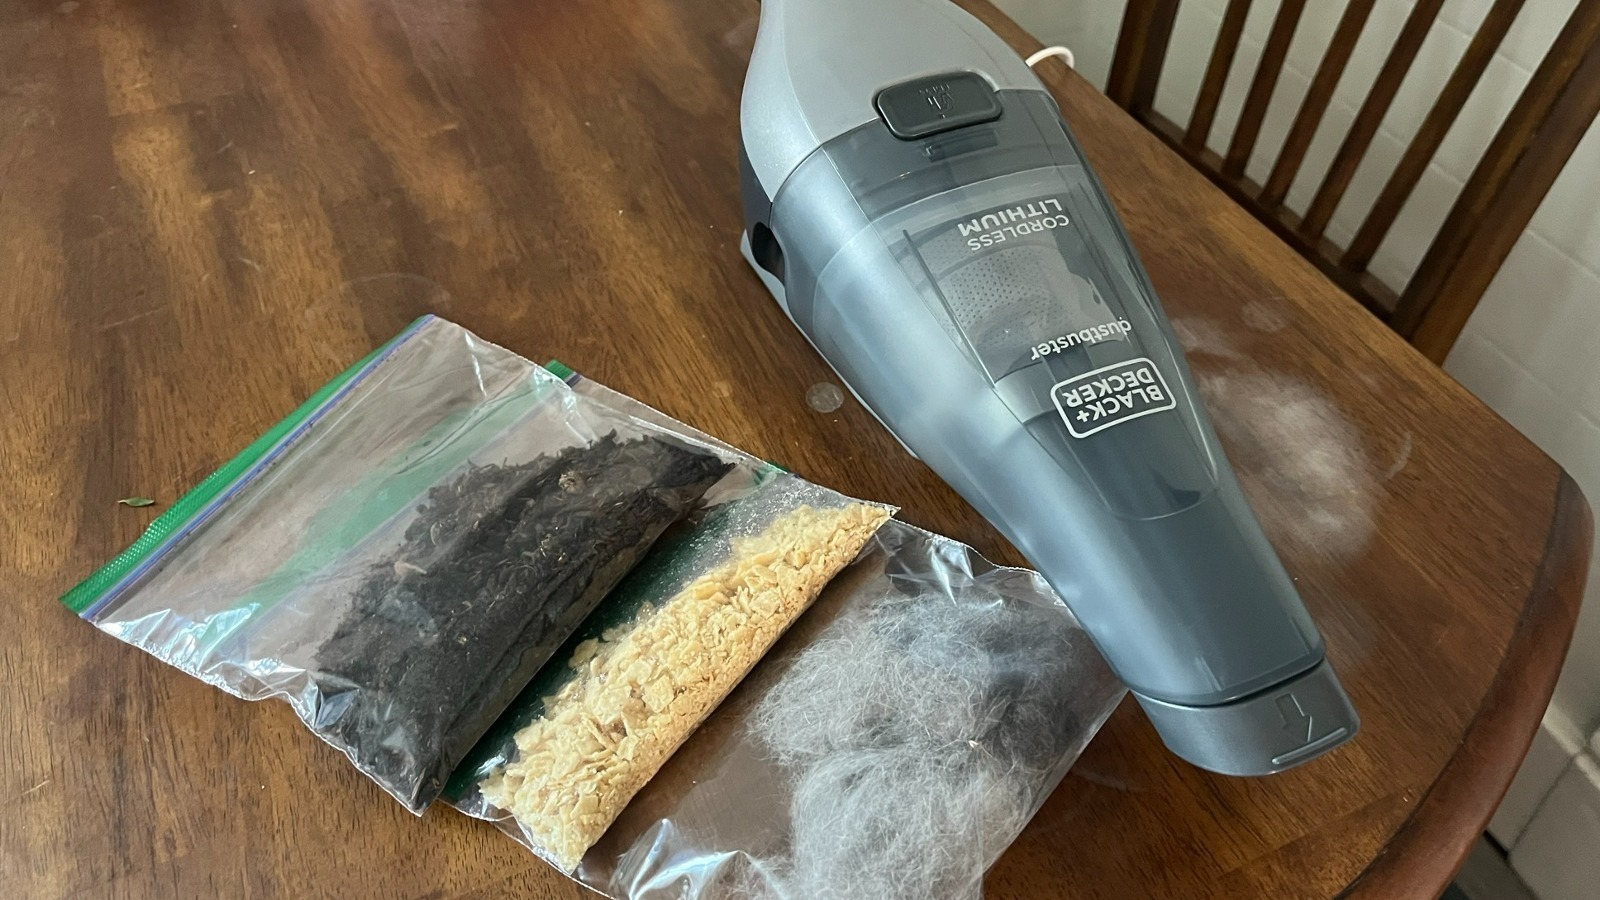 https://www.housedigest.com/img/gallery/we-tried-the-cheapest-cordless-handheld-vacuum-at-target-with-impressive-results/l-intro-1694889632.jpg